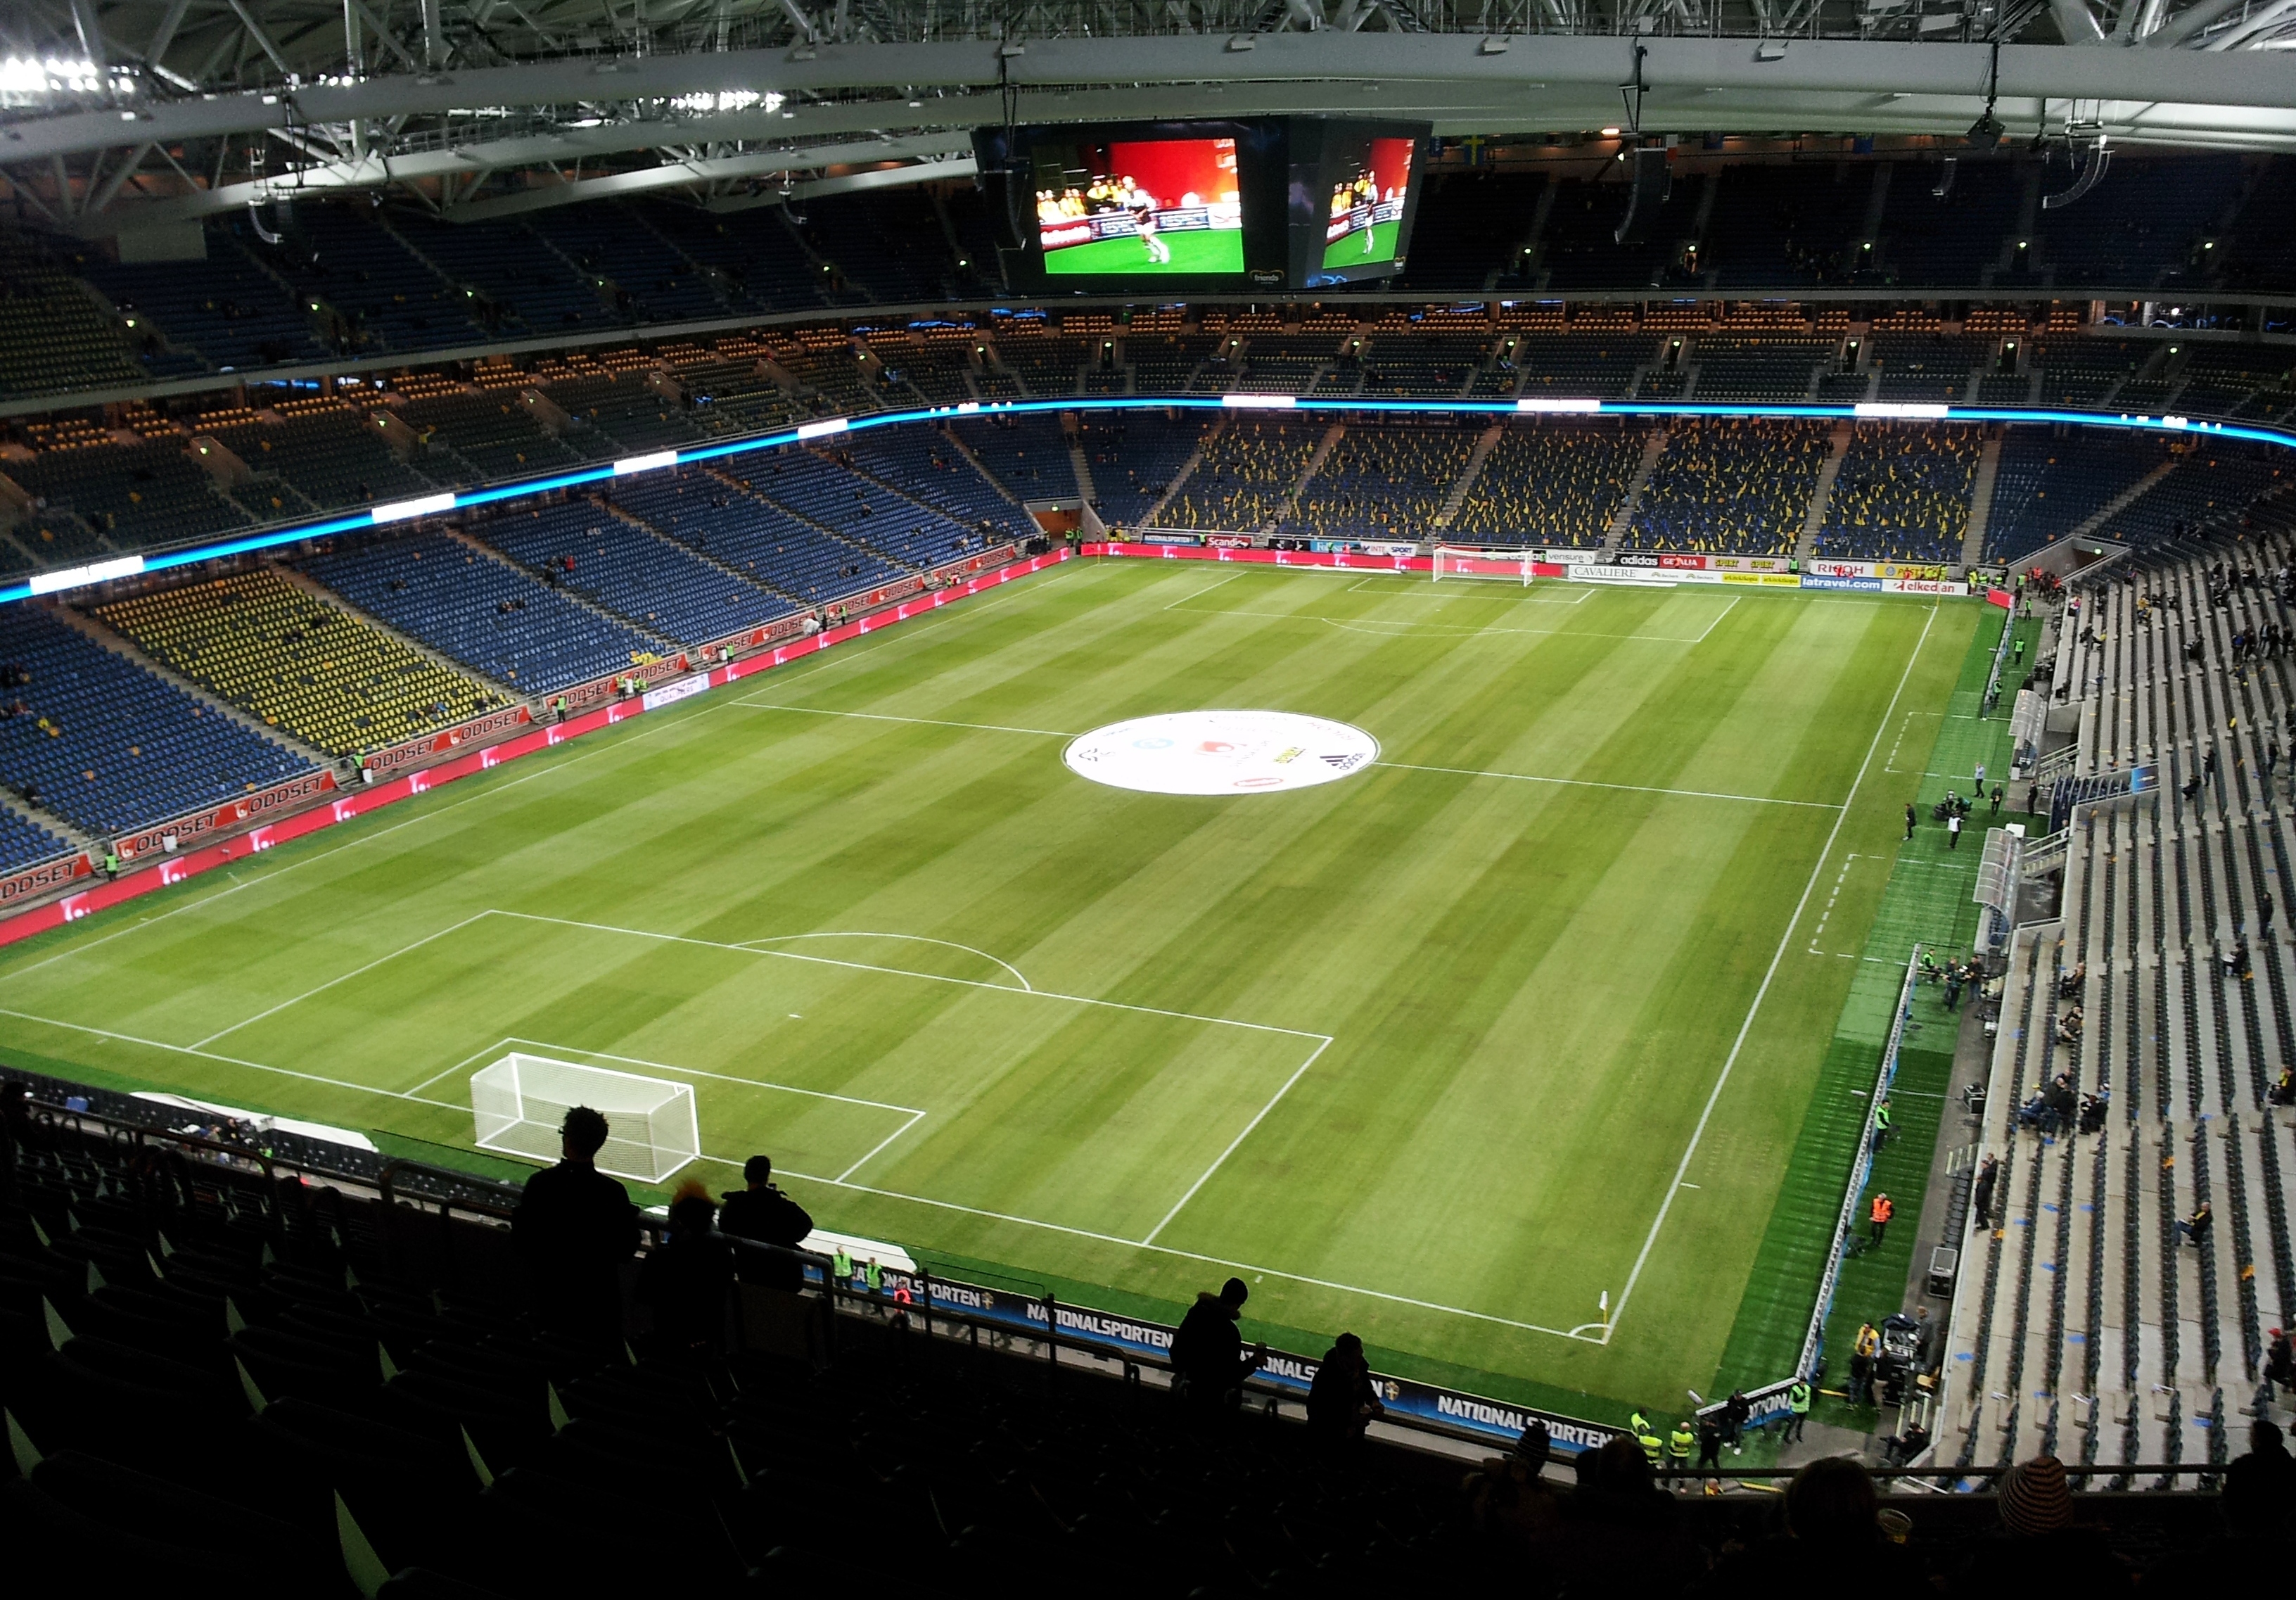 File:Friends Arena from inside.jpg - Wikimedia Commons